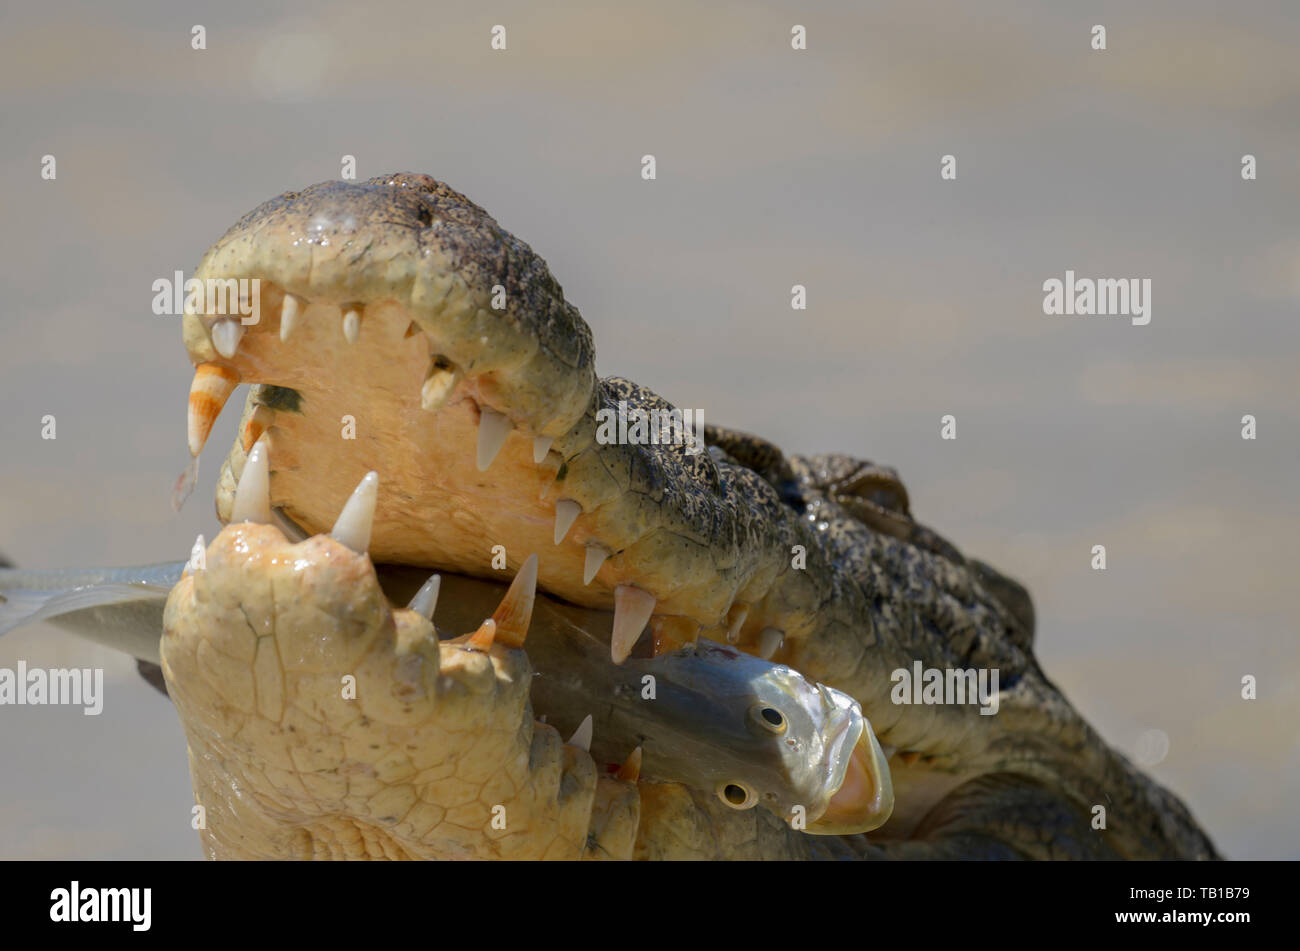 Saltwater crocodile catching fish at a low level crossing over the East Alligator river, Kakadu, Australia. Stock Photo